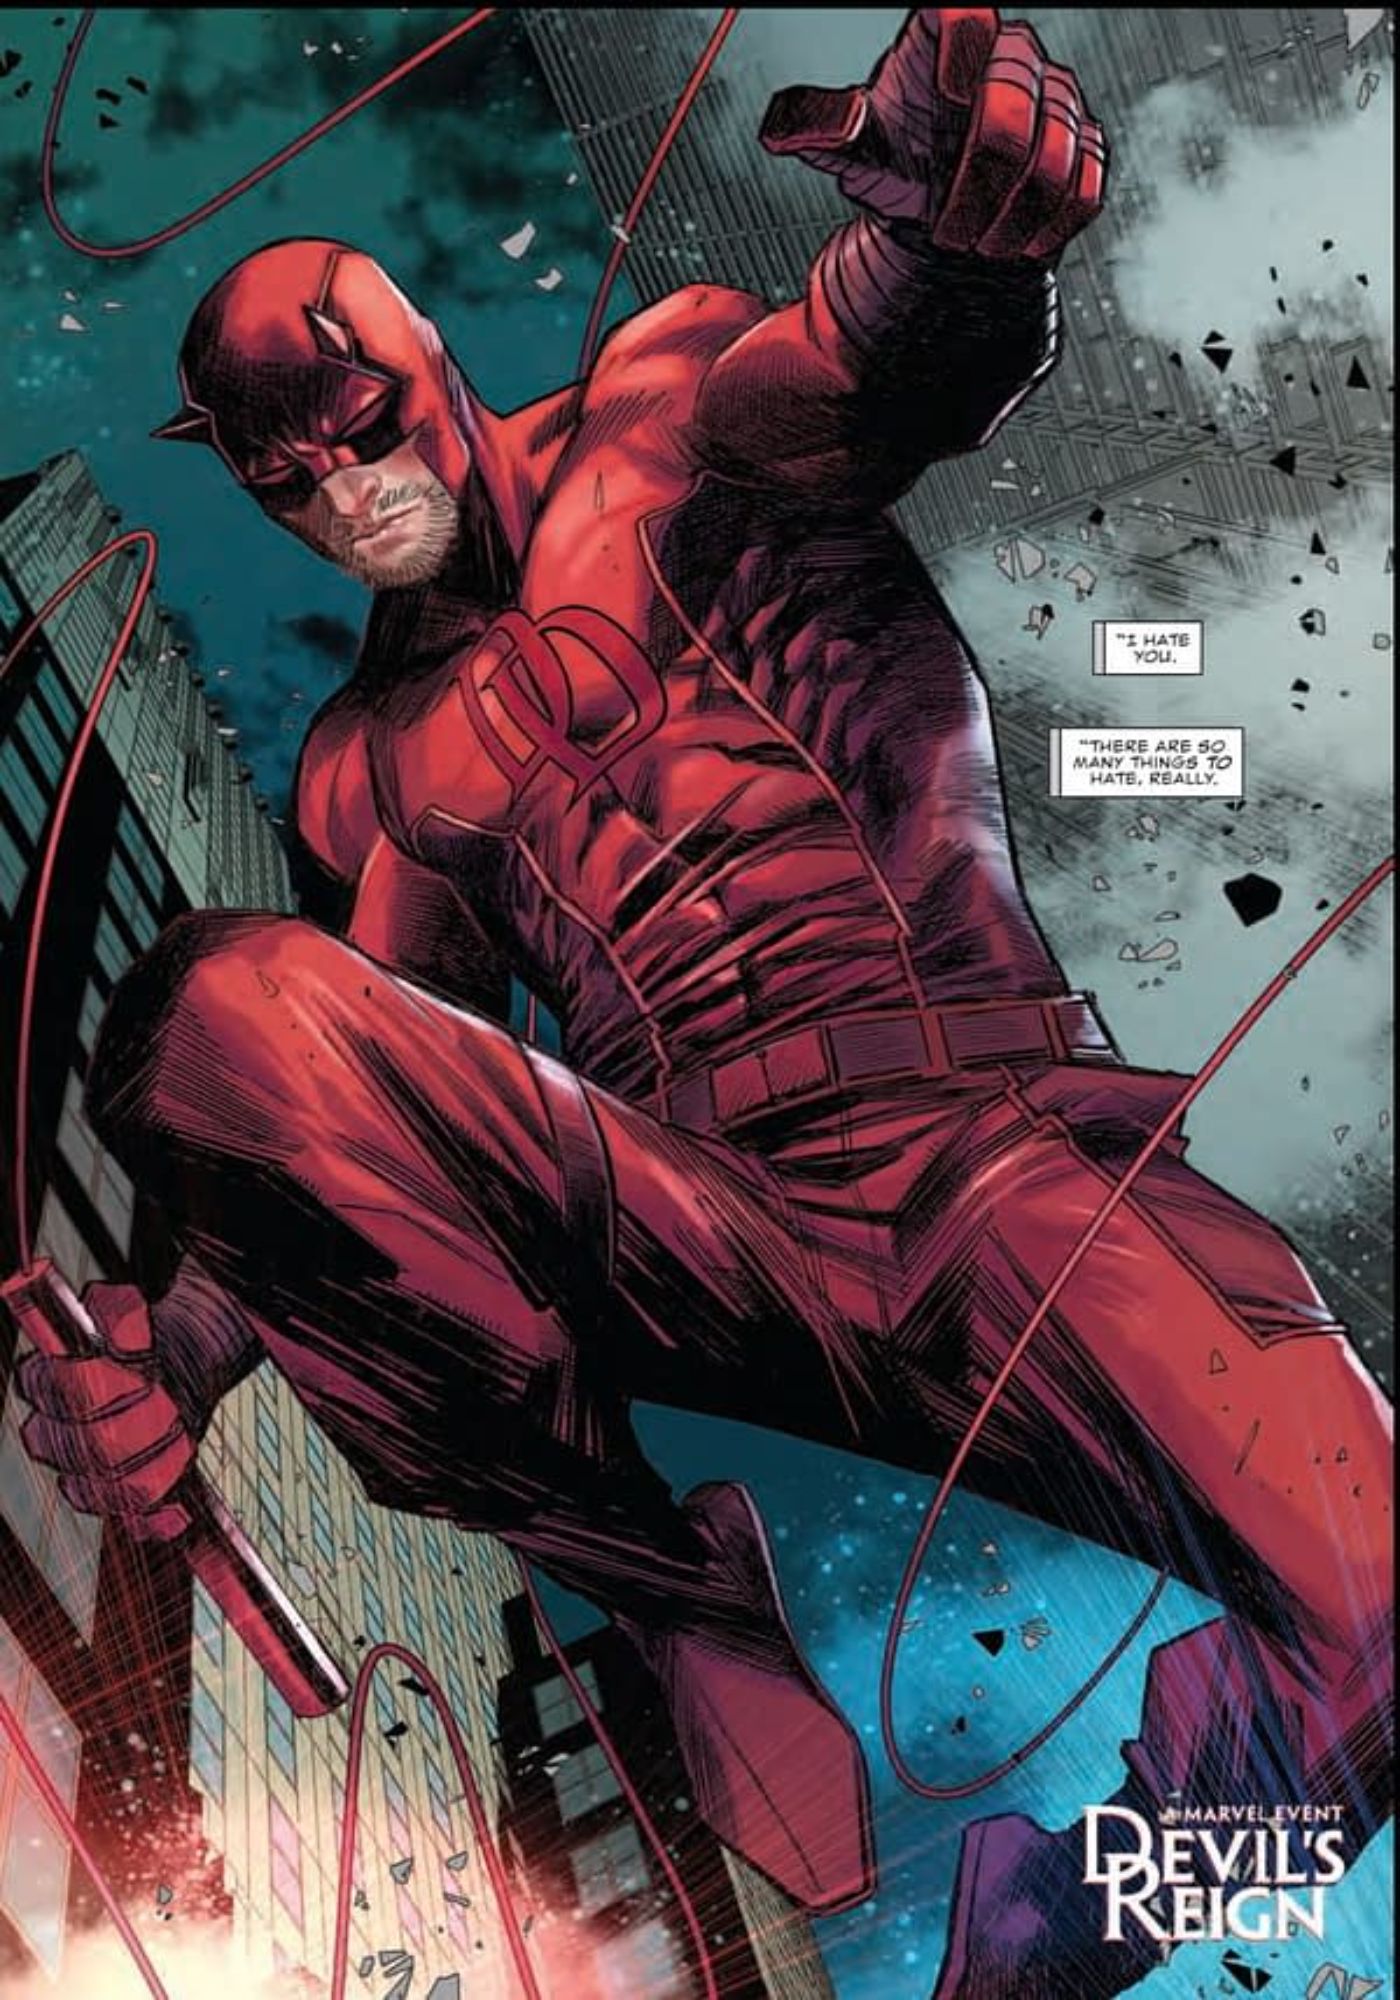 Daredevil Is Back With The Avengers in Devil’s Reign First Look